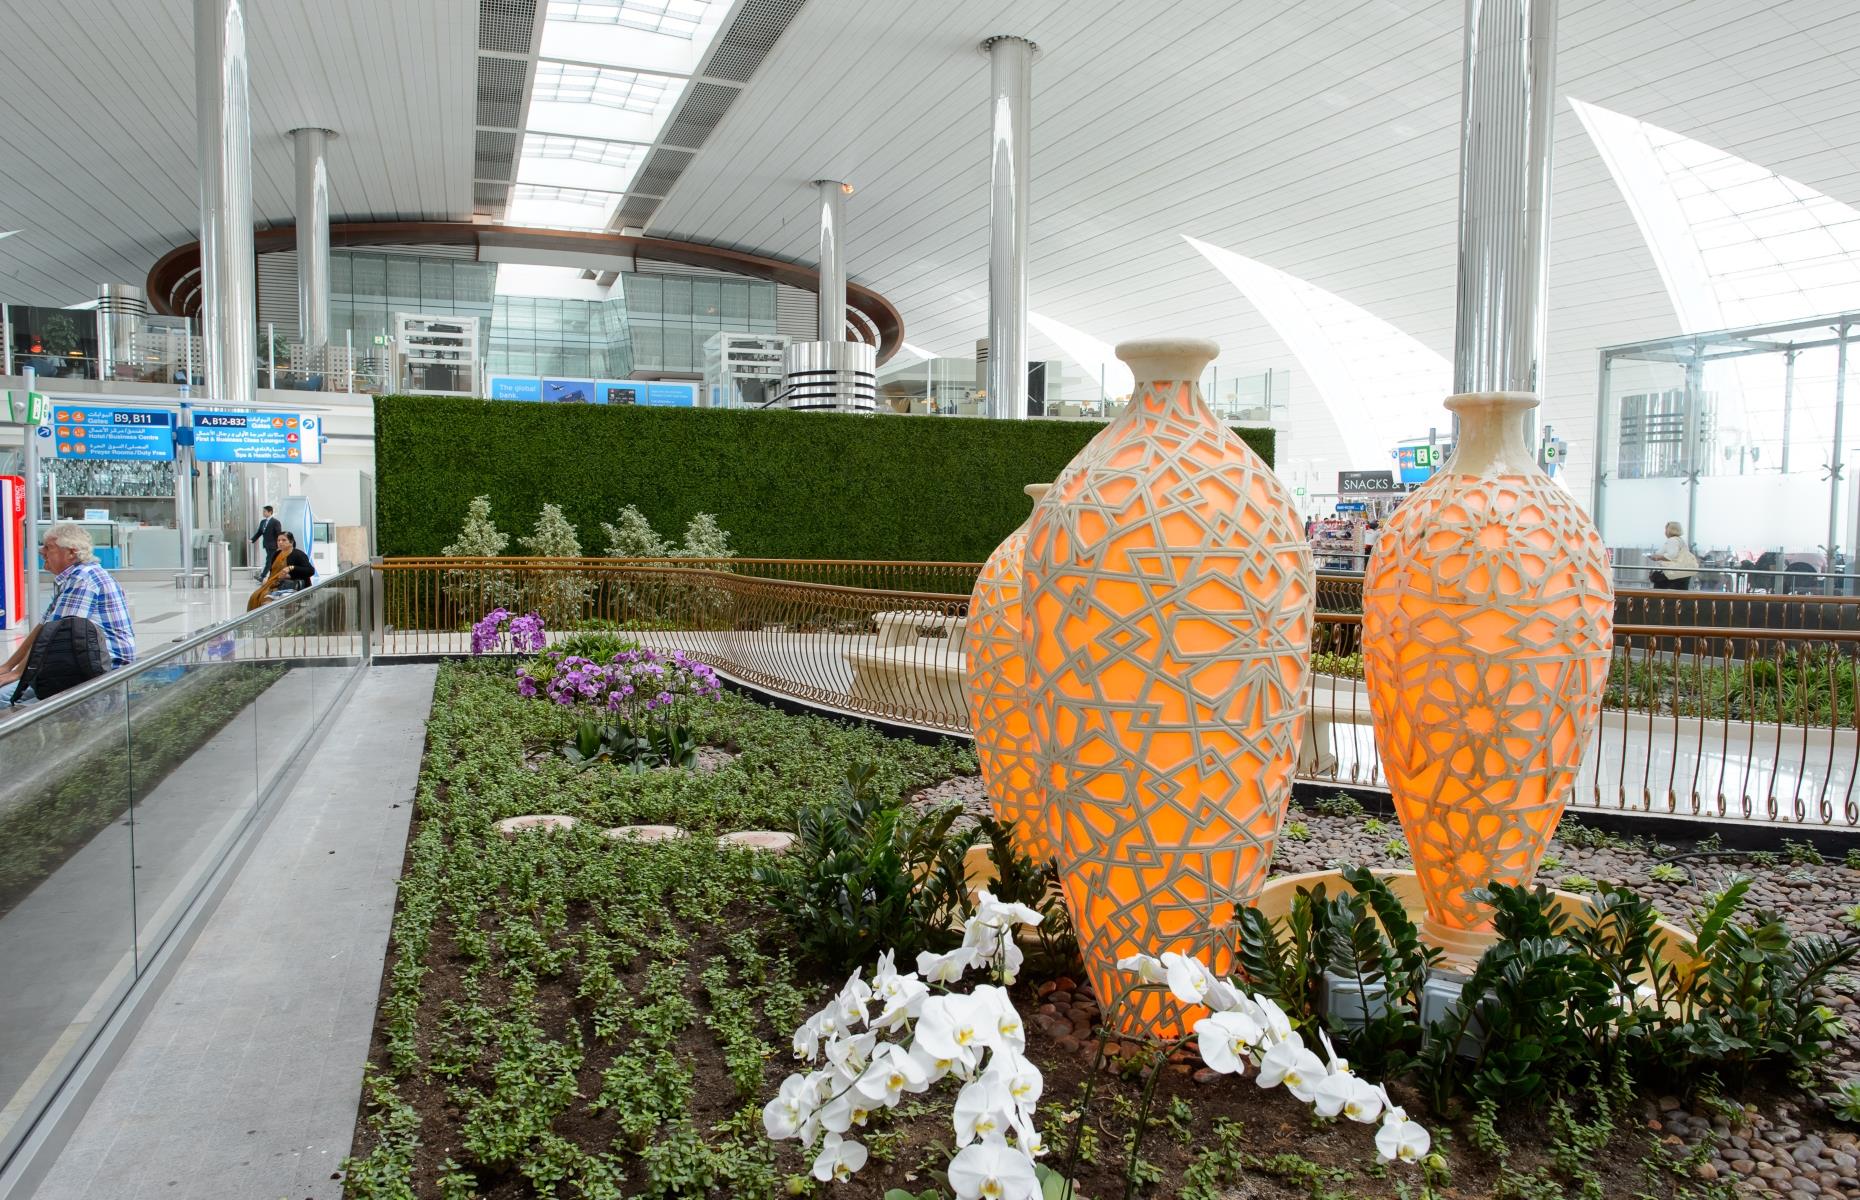 There's lots to like about this vast air hub in Dubai including many shops, the indoor 'Zen' gardens (pictured) and a health club where you can pay to use the pool, sauna and gym. There's a reason it's the world's third largest and busiest airport for international passengers.